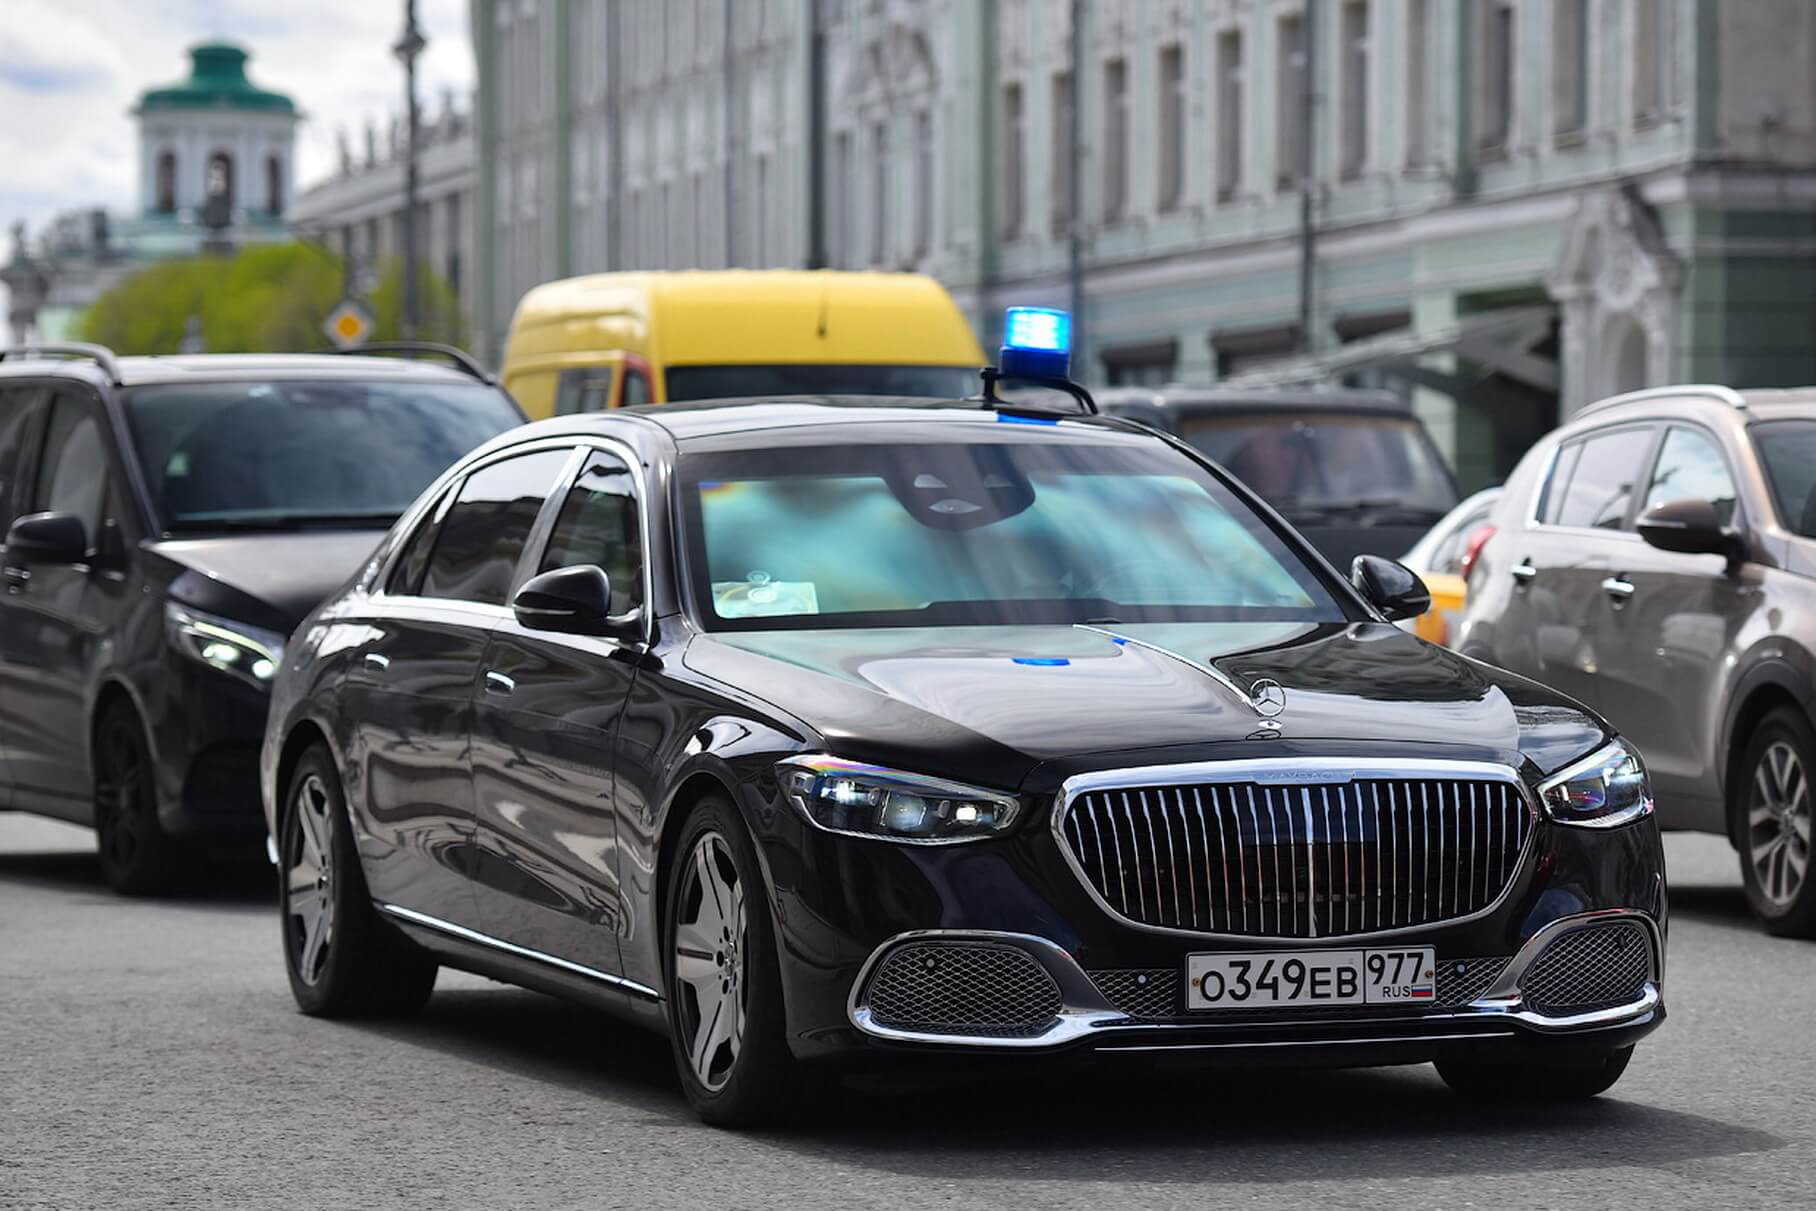 Russian intelligence services have a new armored Maybach